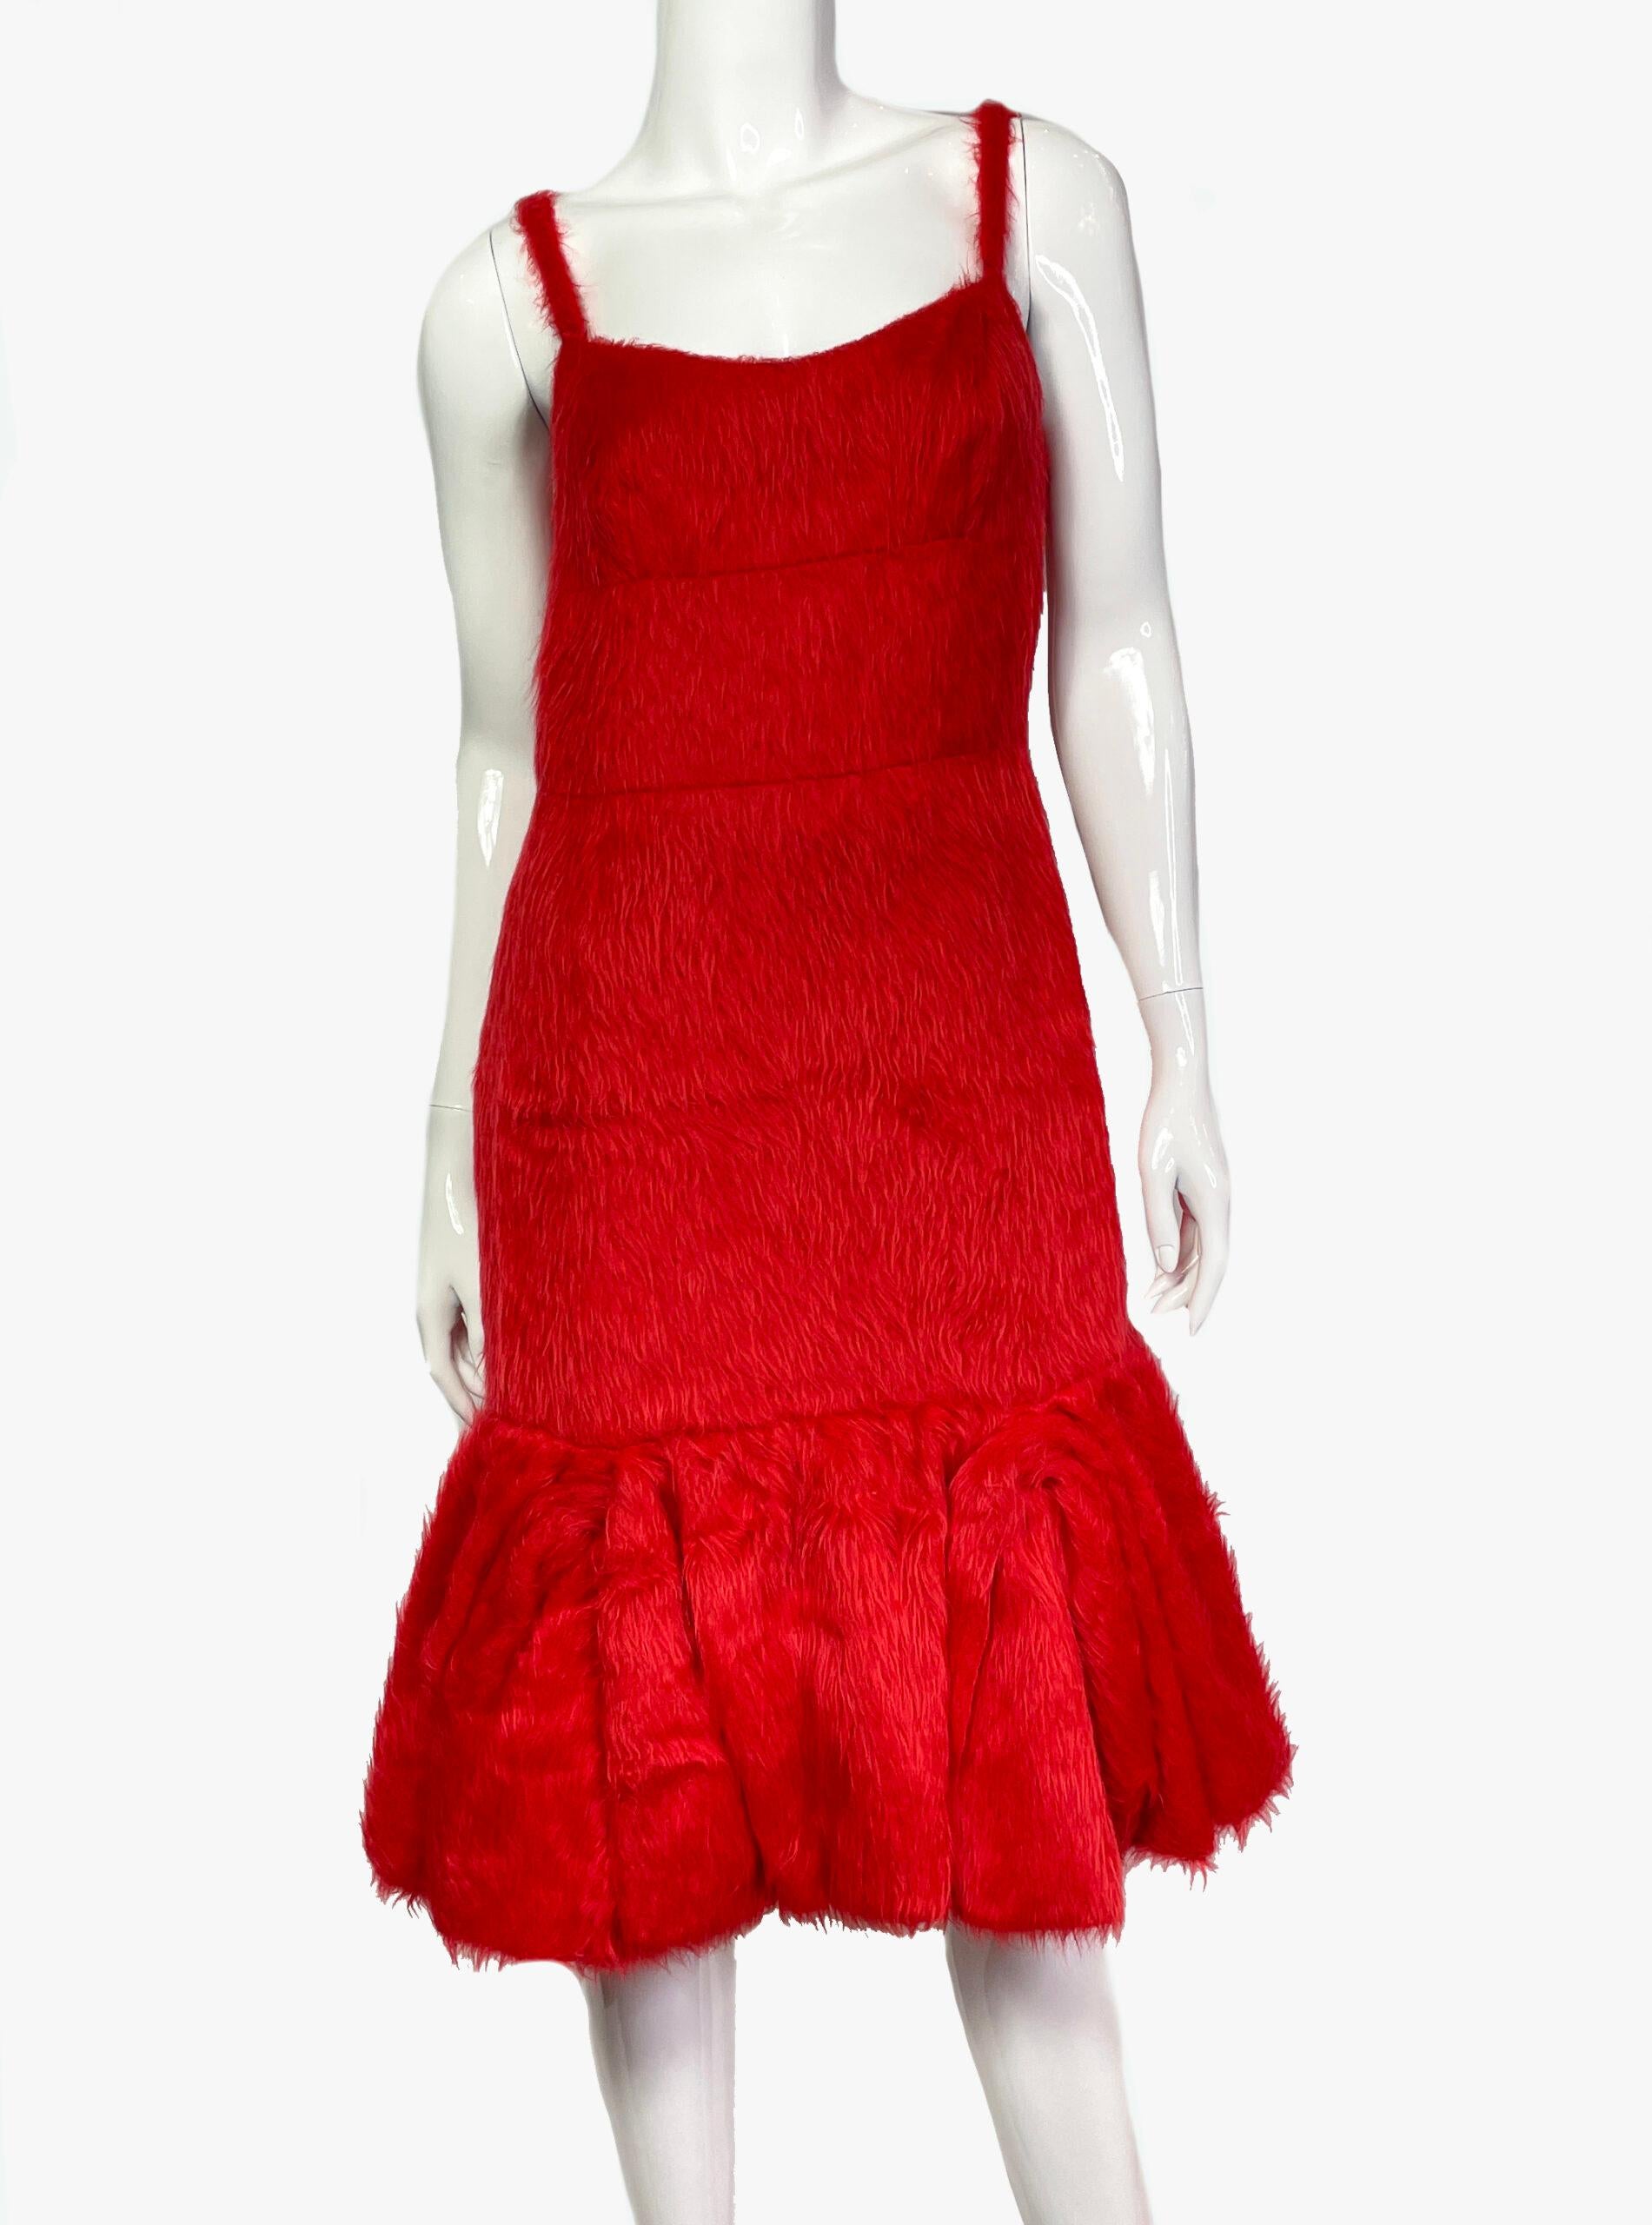 Prada faux fur dress in red color from SS2017 collection. 
Fastens with a zipper.
Size: M
Condition: Very good
........Additional information ........

- Photo might be slightly different from actual item in terms of color due to the lighting during